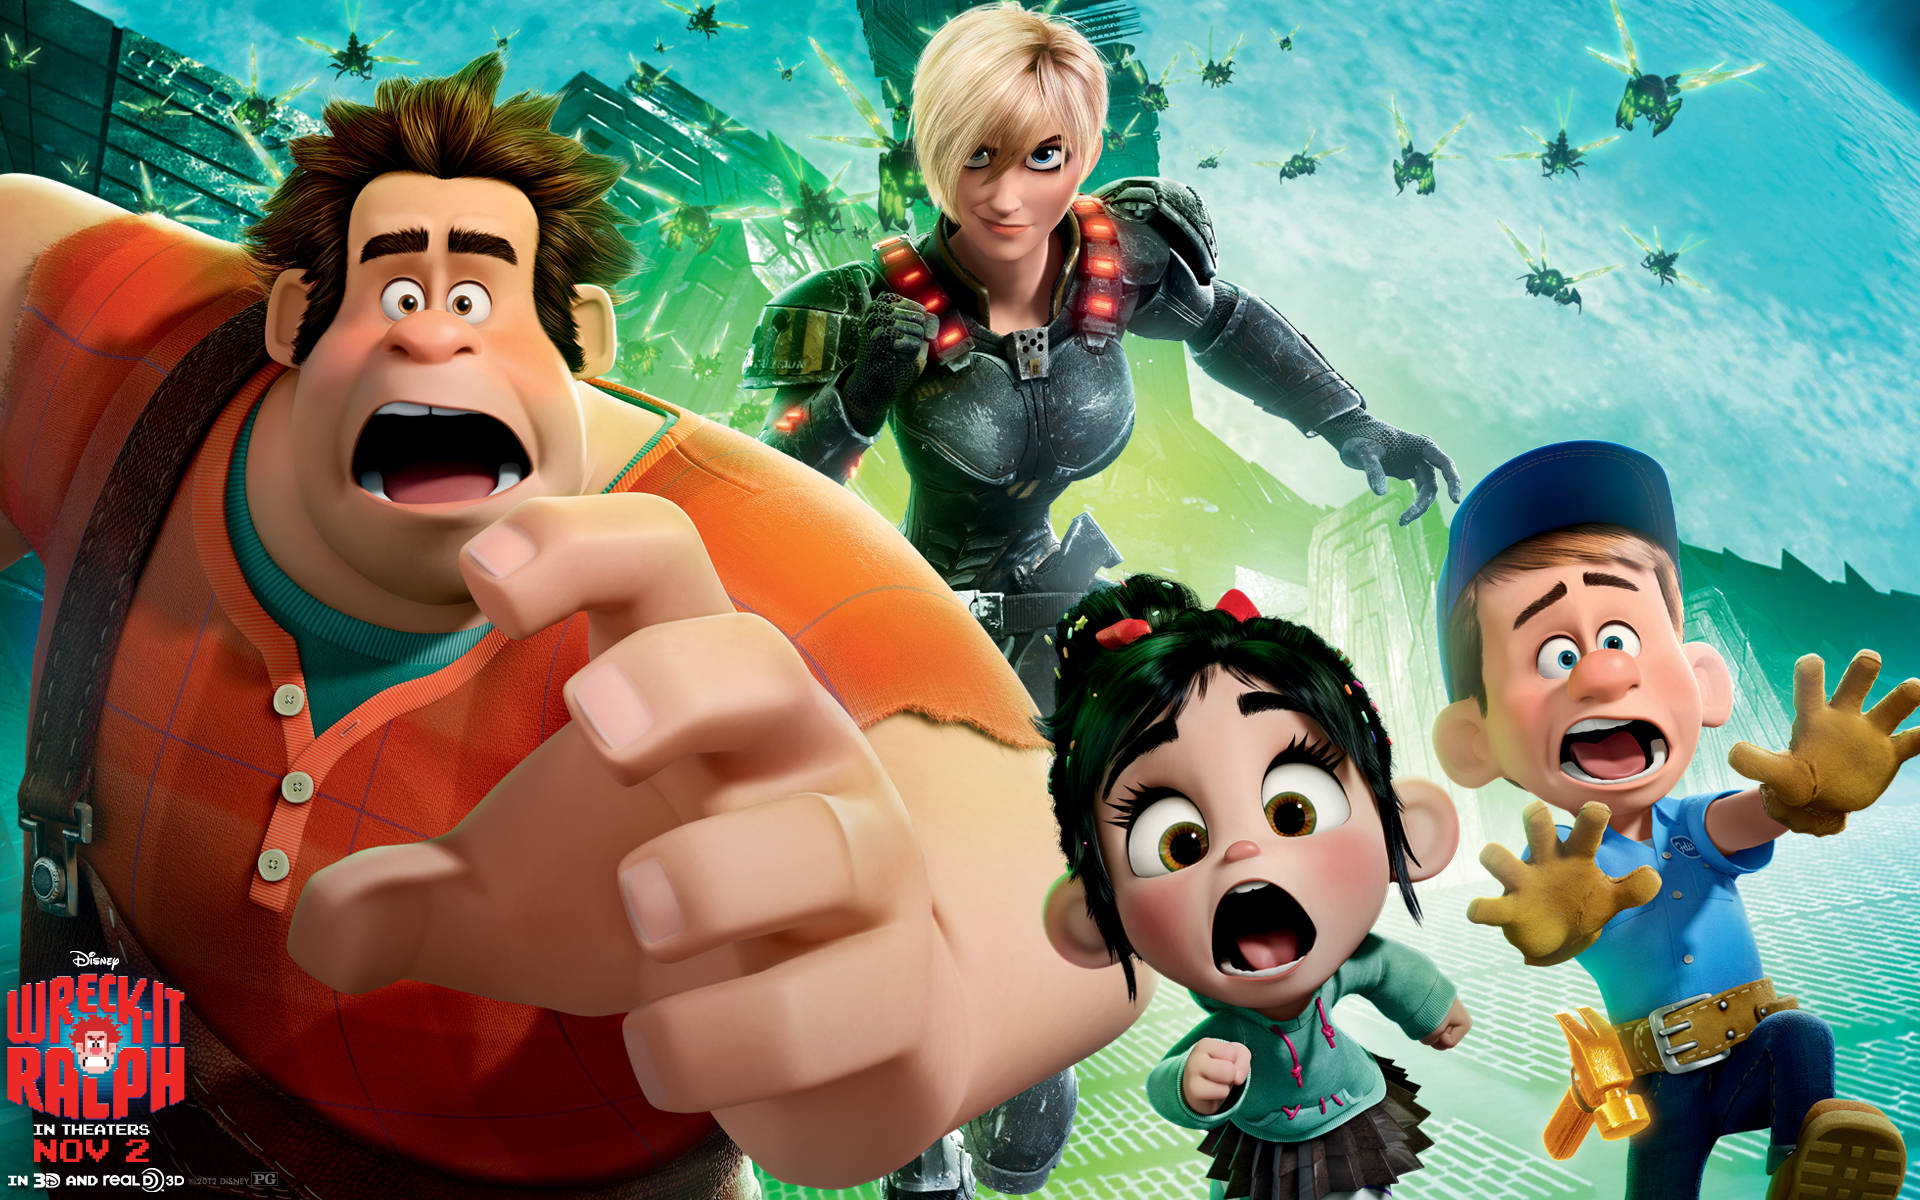 Wreck-it Ralph 2012 Movie Characters Background